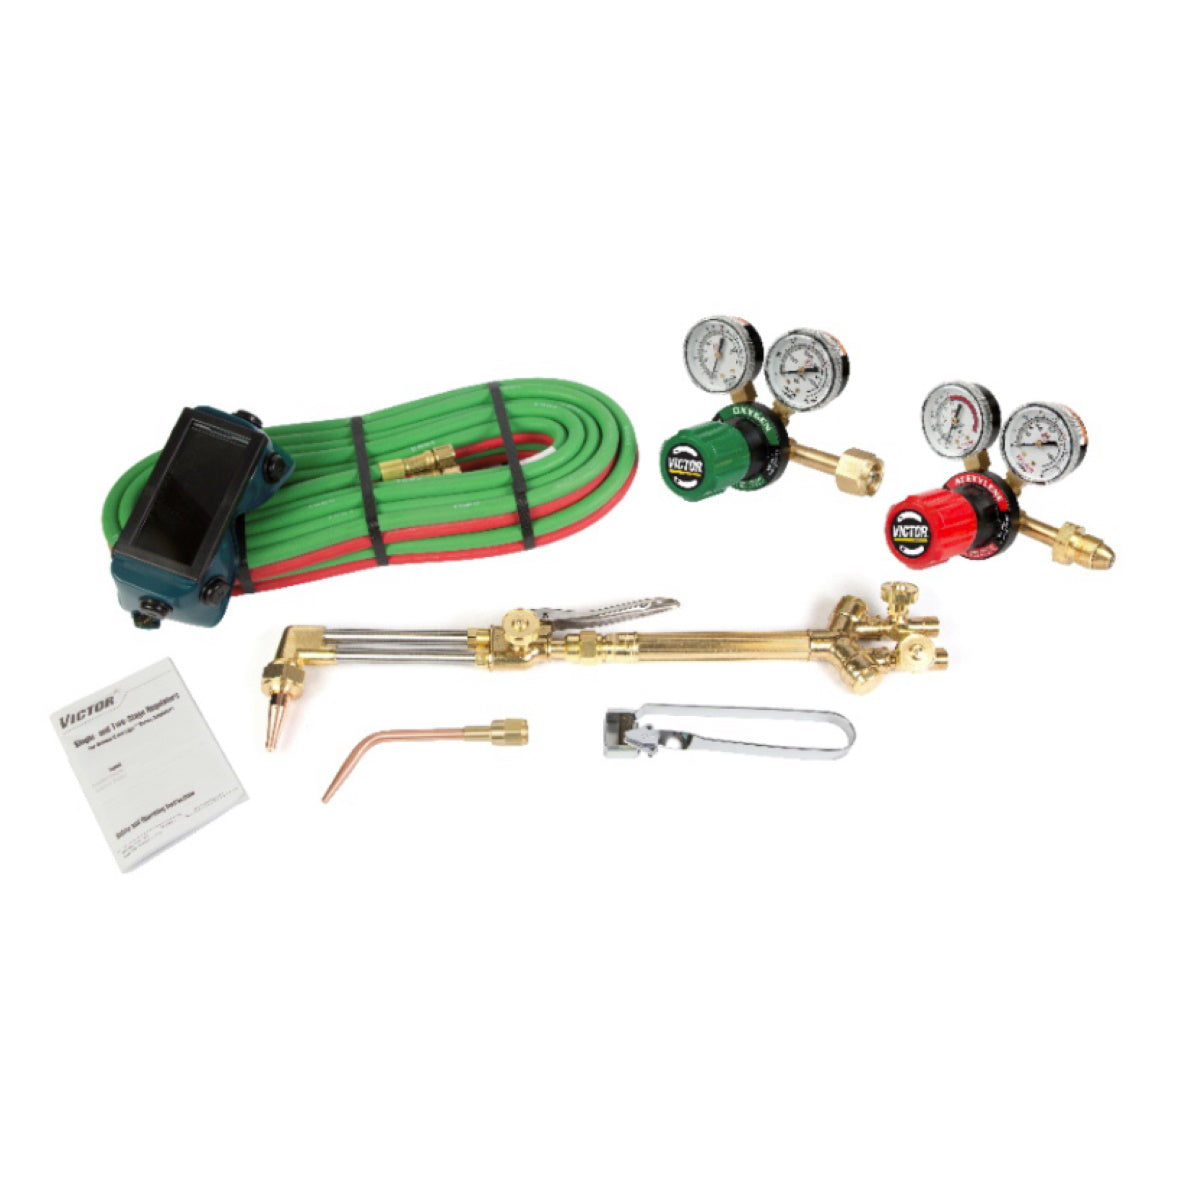 Victor Medalist 250 Classic Welding and Cutting Outfit (0384-2581)